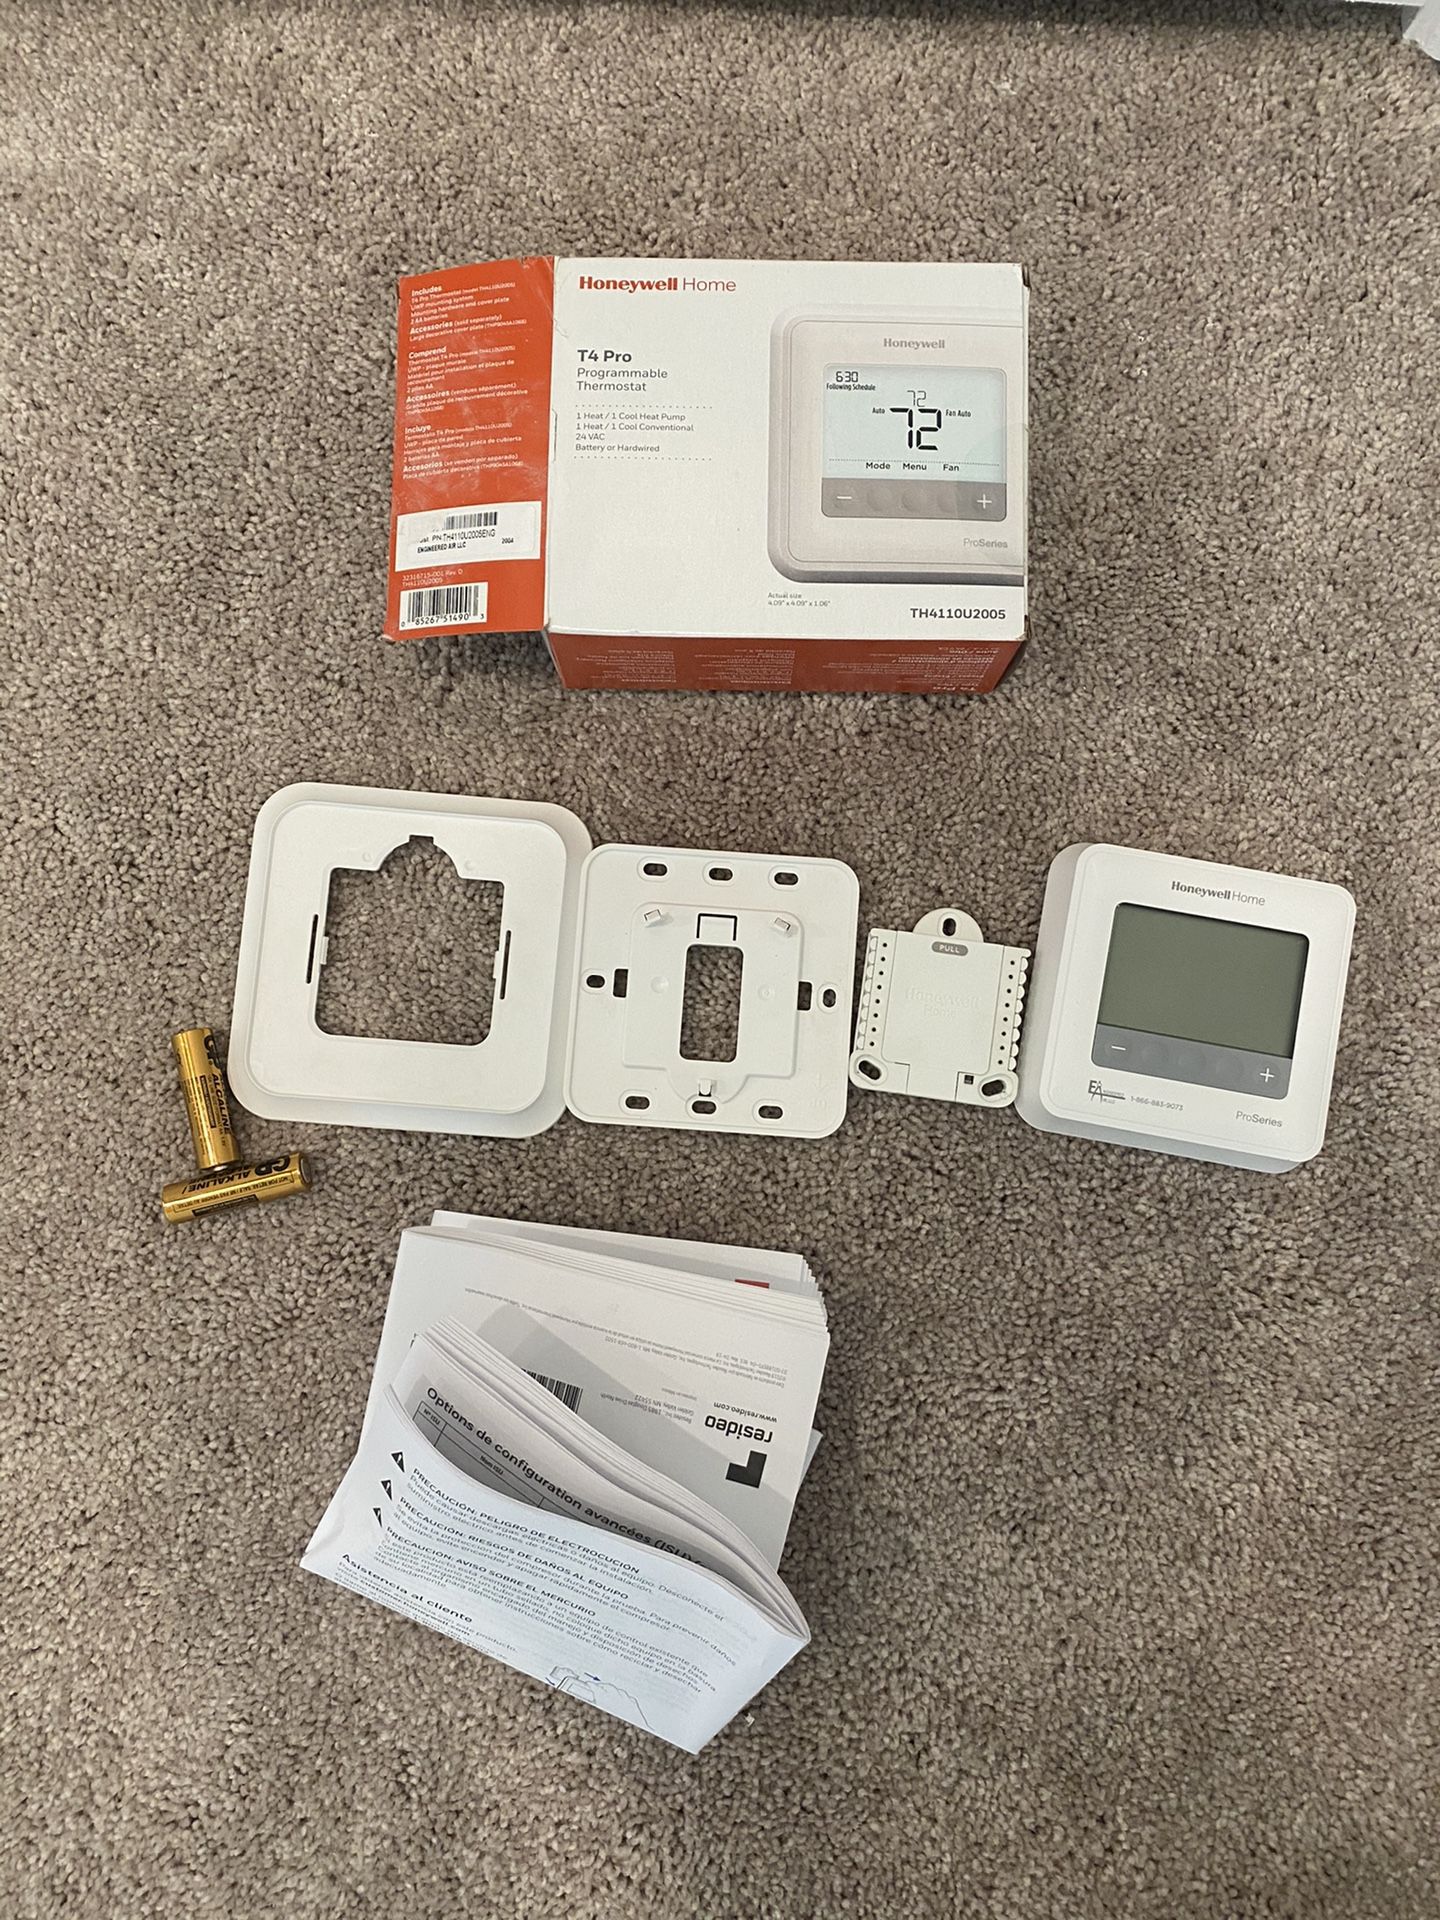 Honeywell Home T4Pro Thermostat